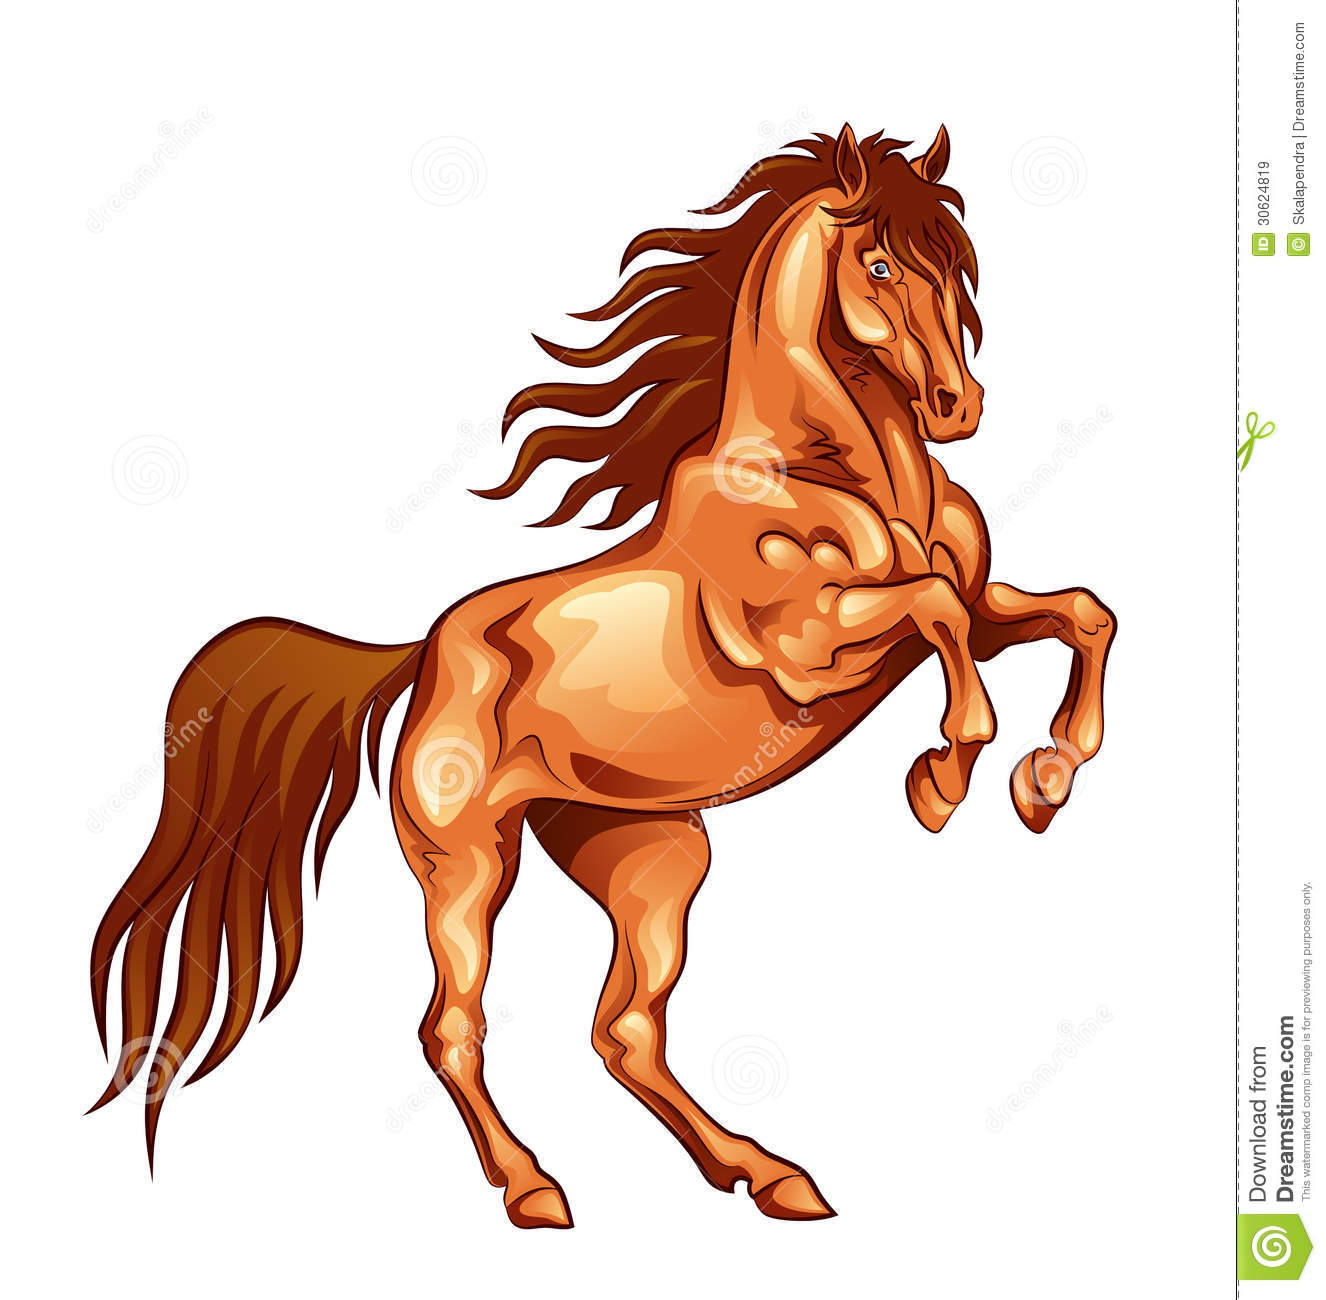 Fiery Horse Royalty Free Stock Images.